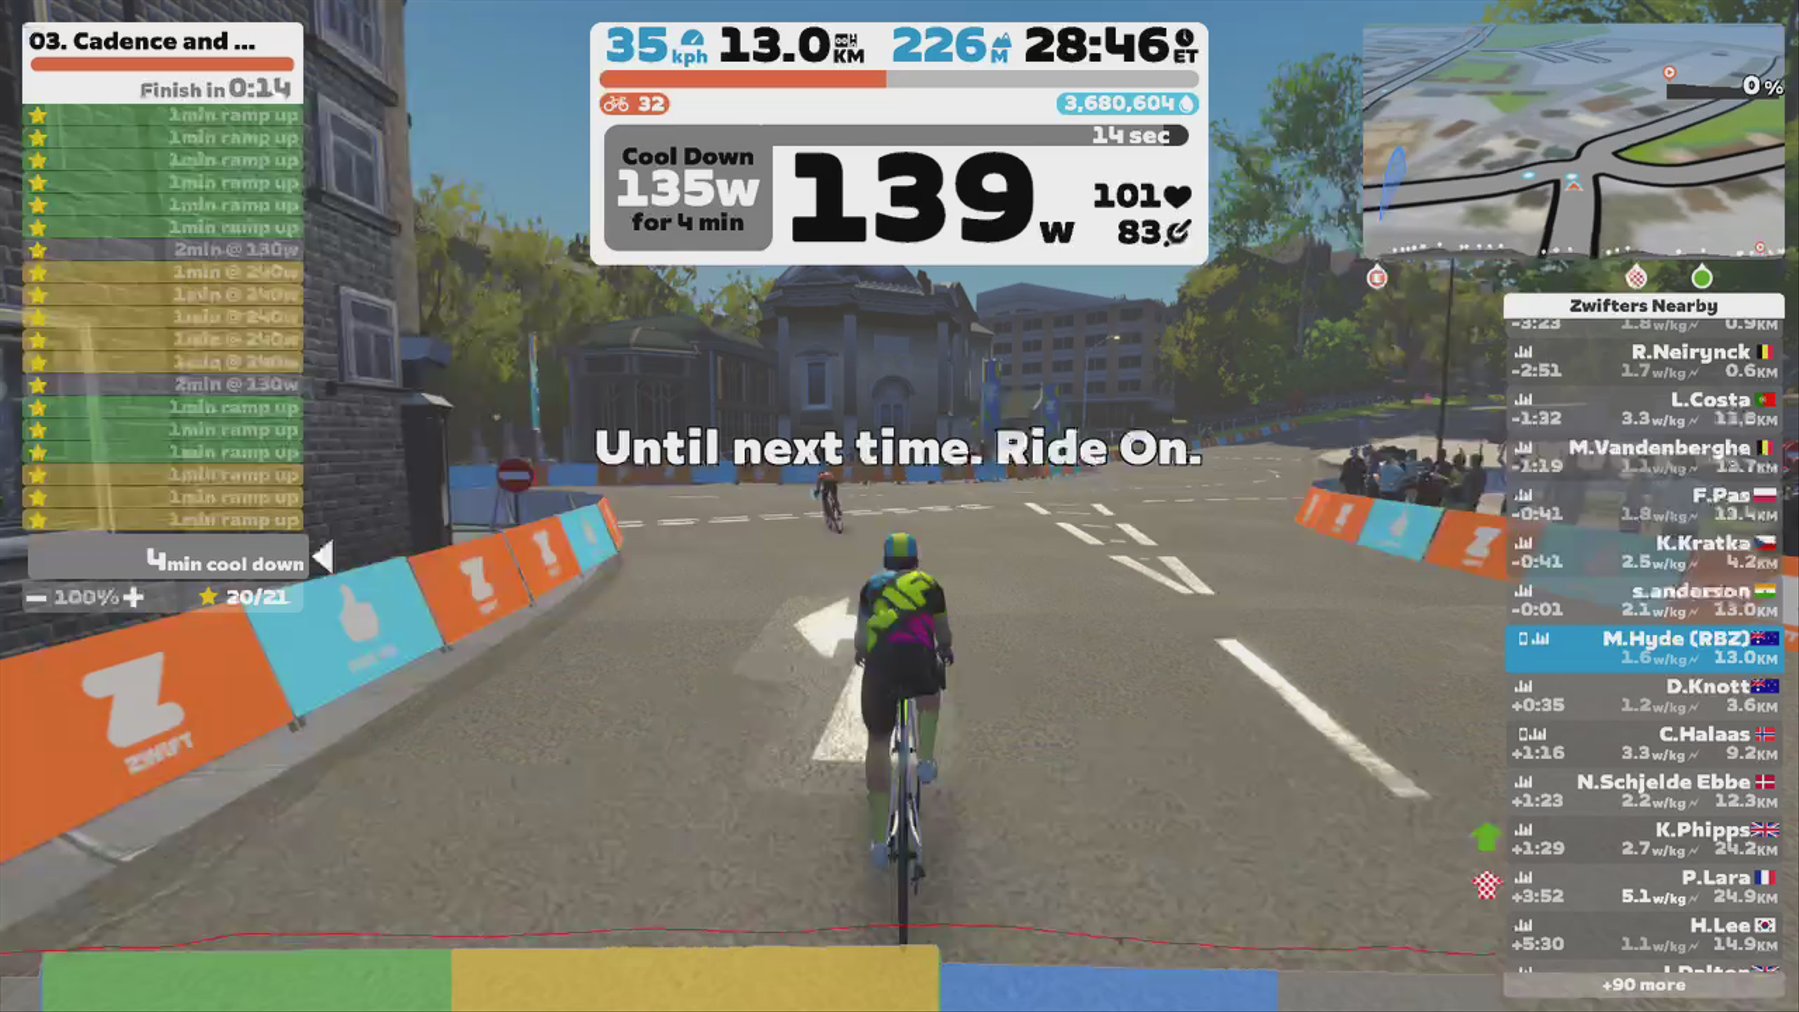 Zwift - 03. Cadence and Cruise [Lite] in Yorkshire